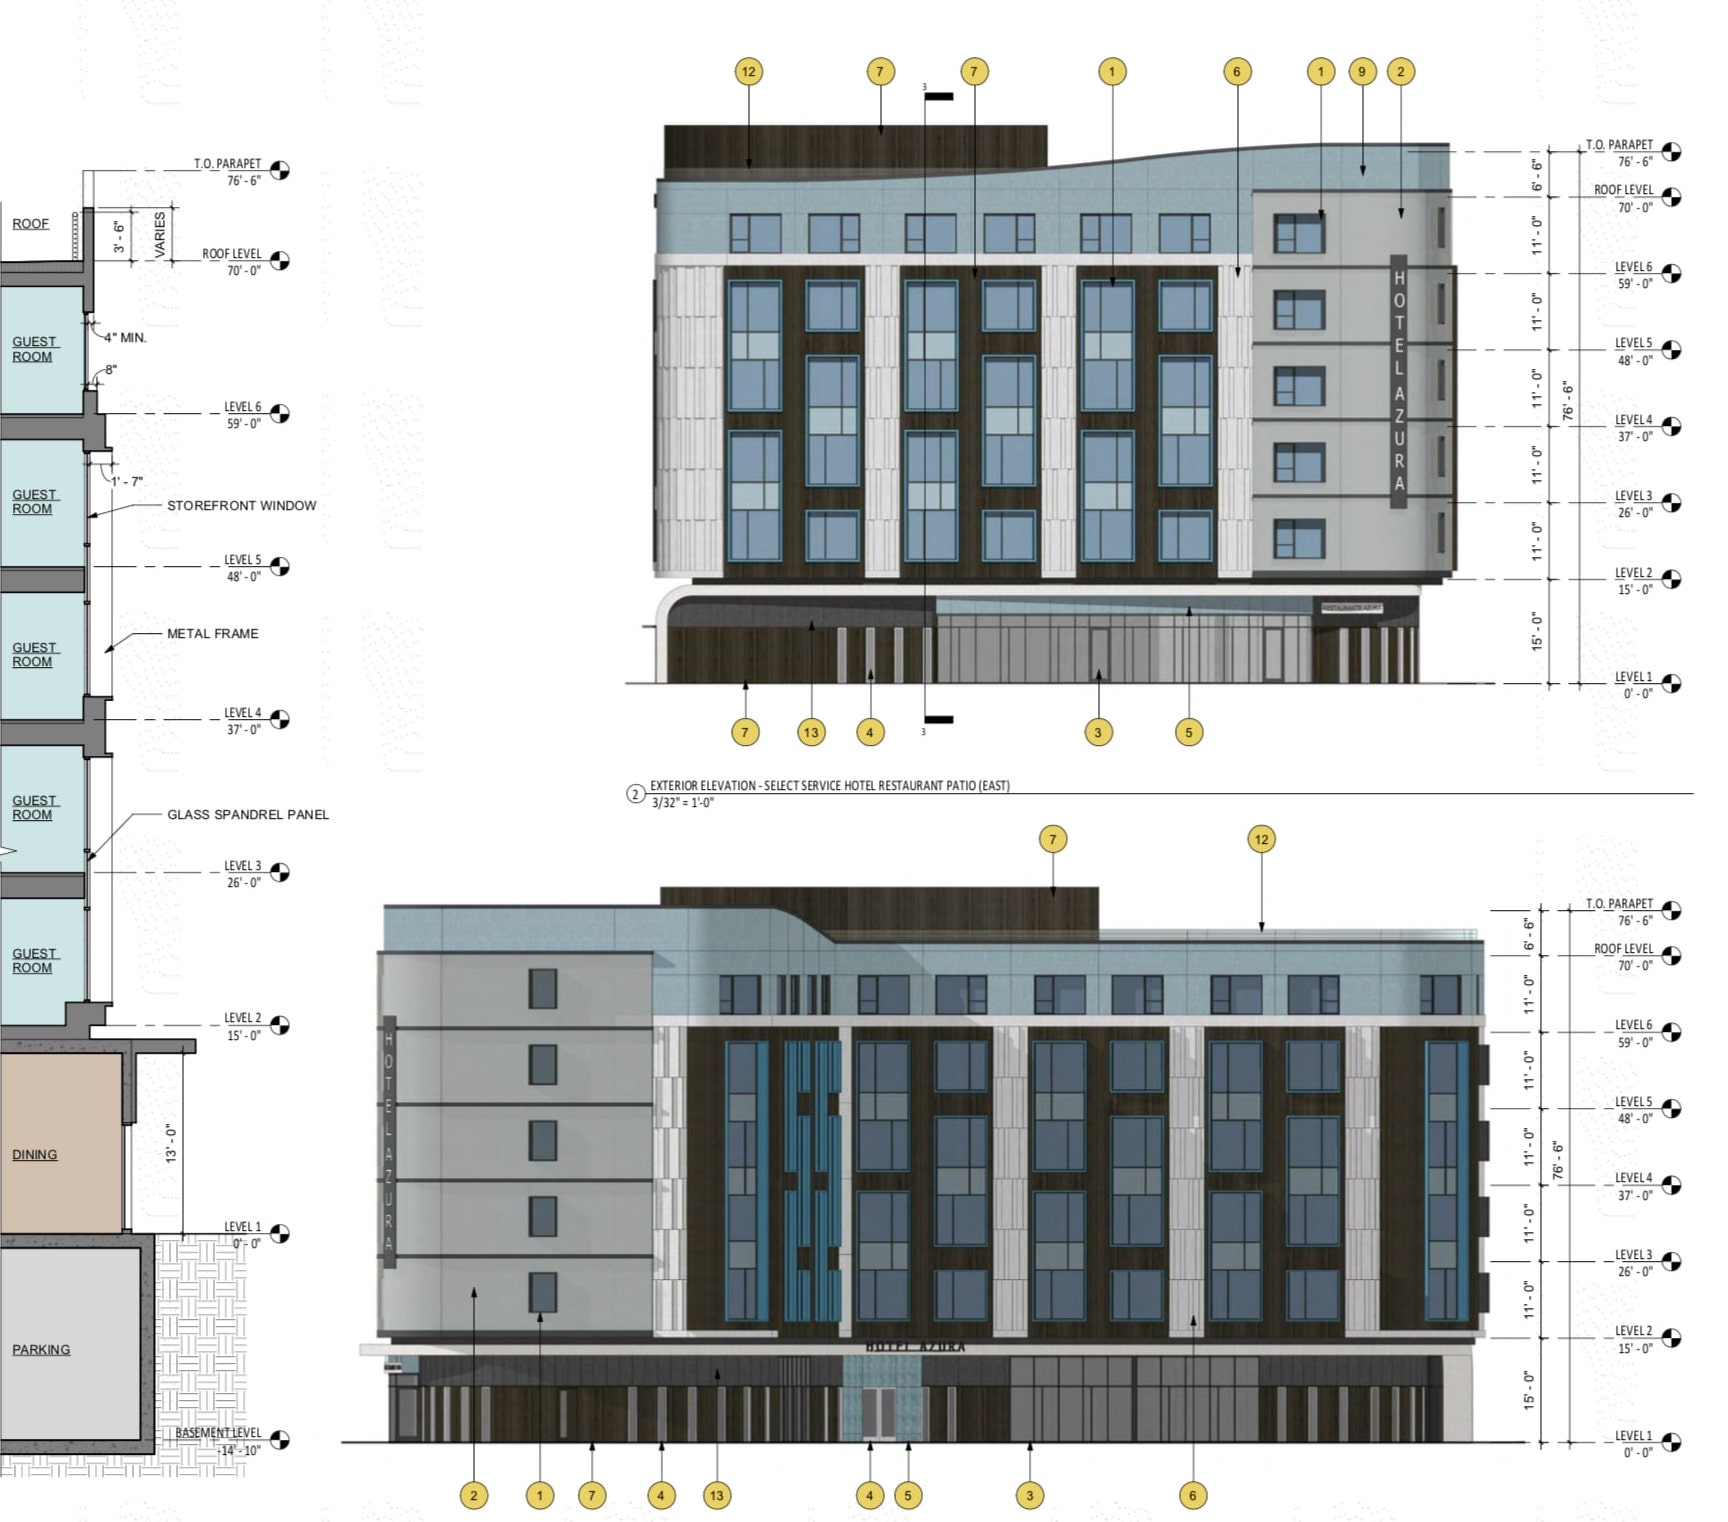 247-295 Commercial Street Elevations